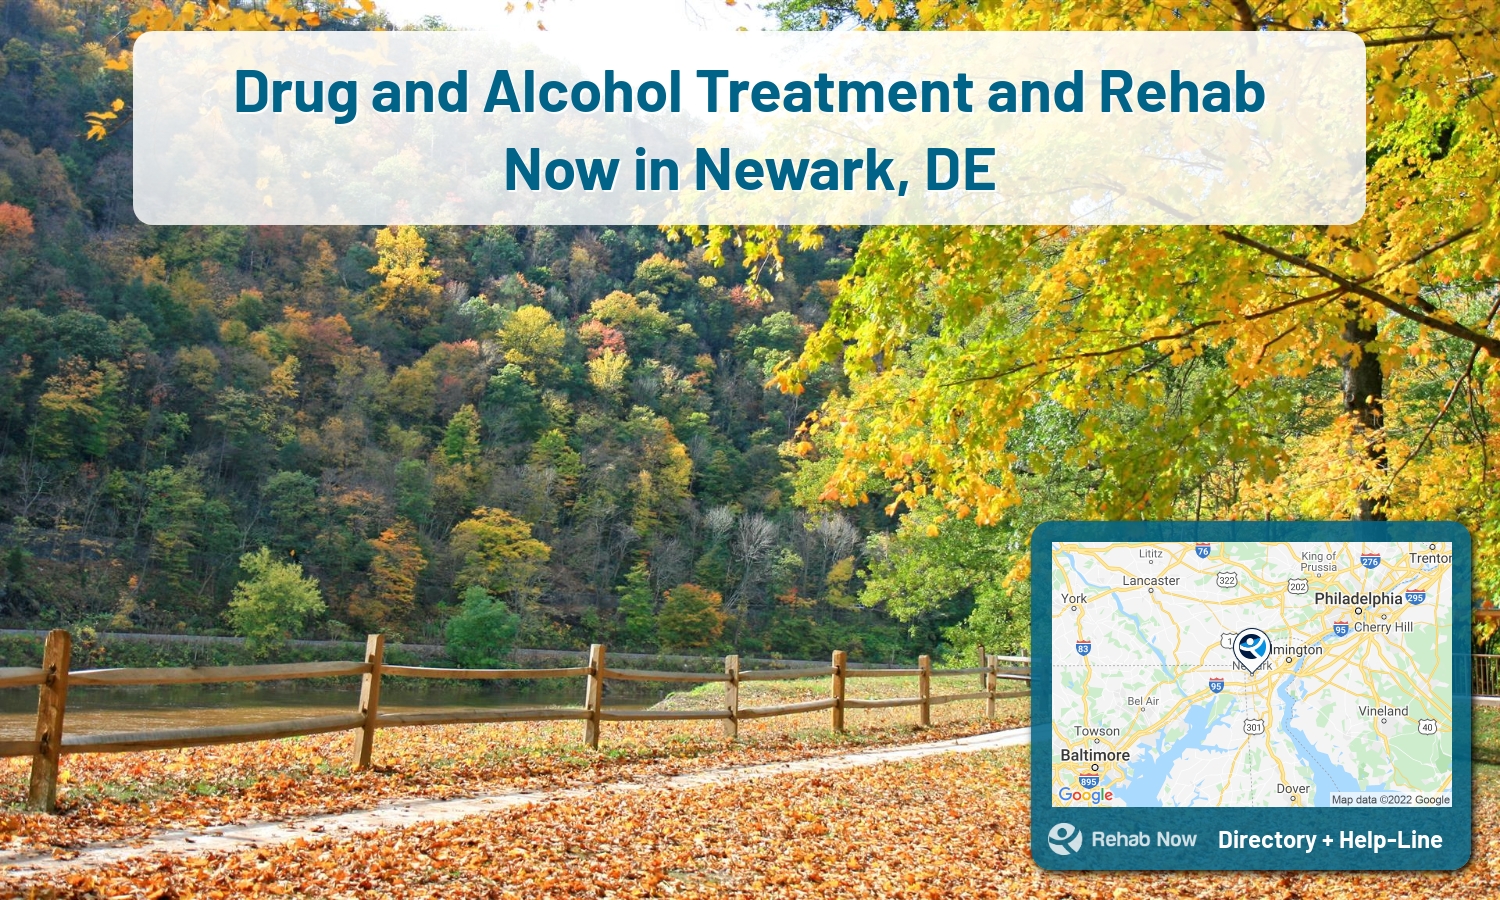 Newark, DE Treatment Centers. Find drug rehab in Newark, Delaware, or detox and treatment programs. Get the right help now!